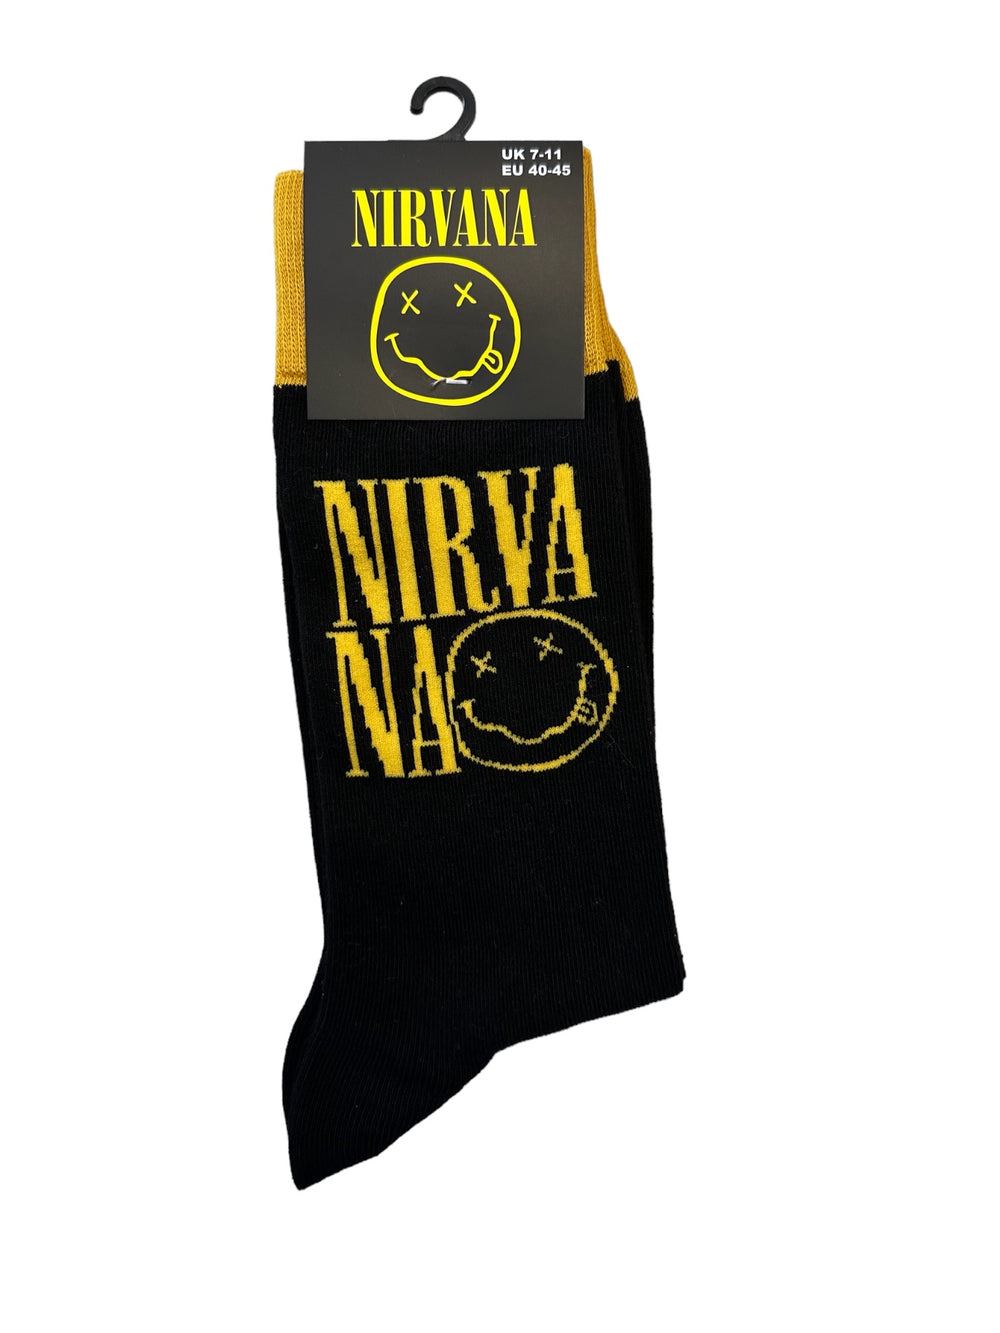 Nirvana Logo Stacked Official Product 1 Pair Jacquard Socks Brand New